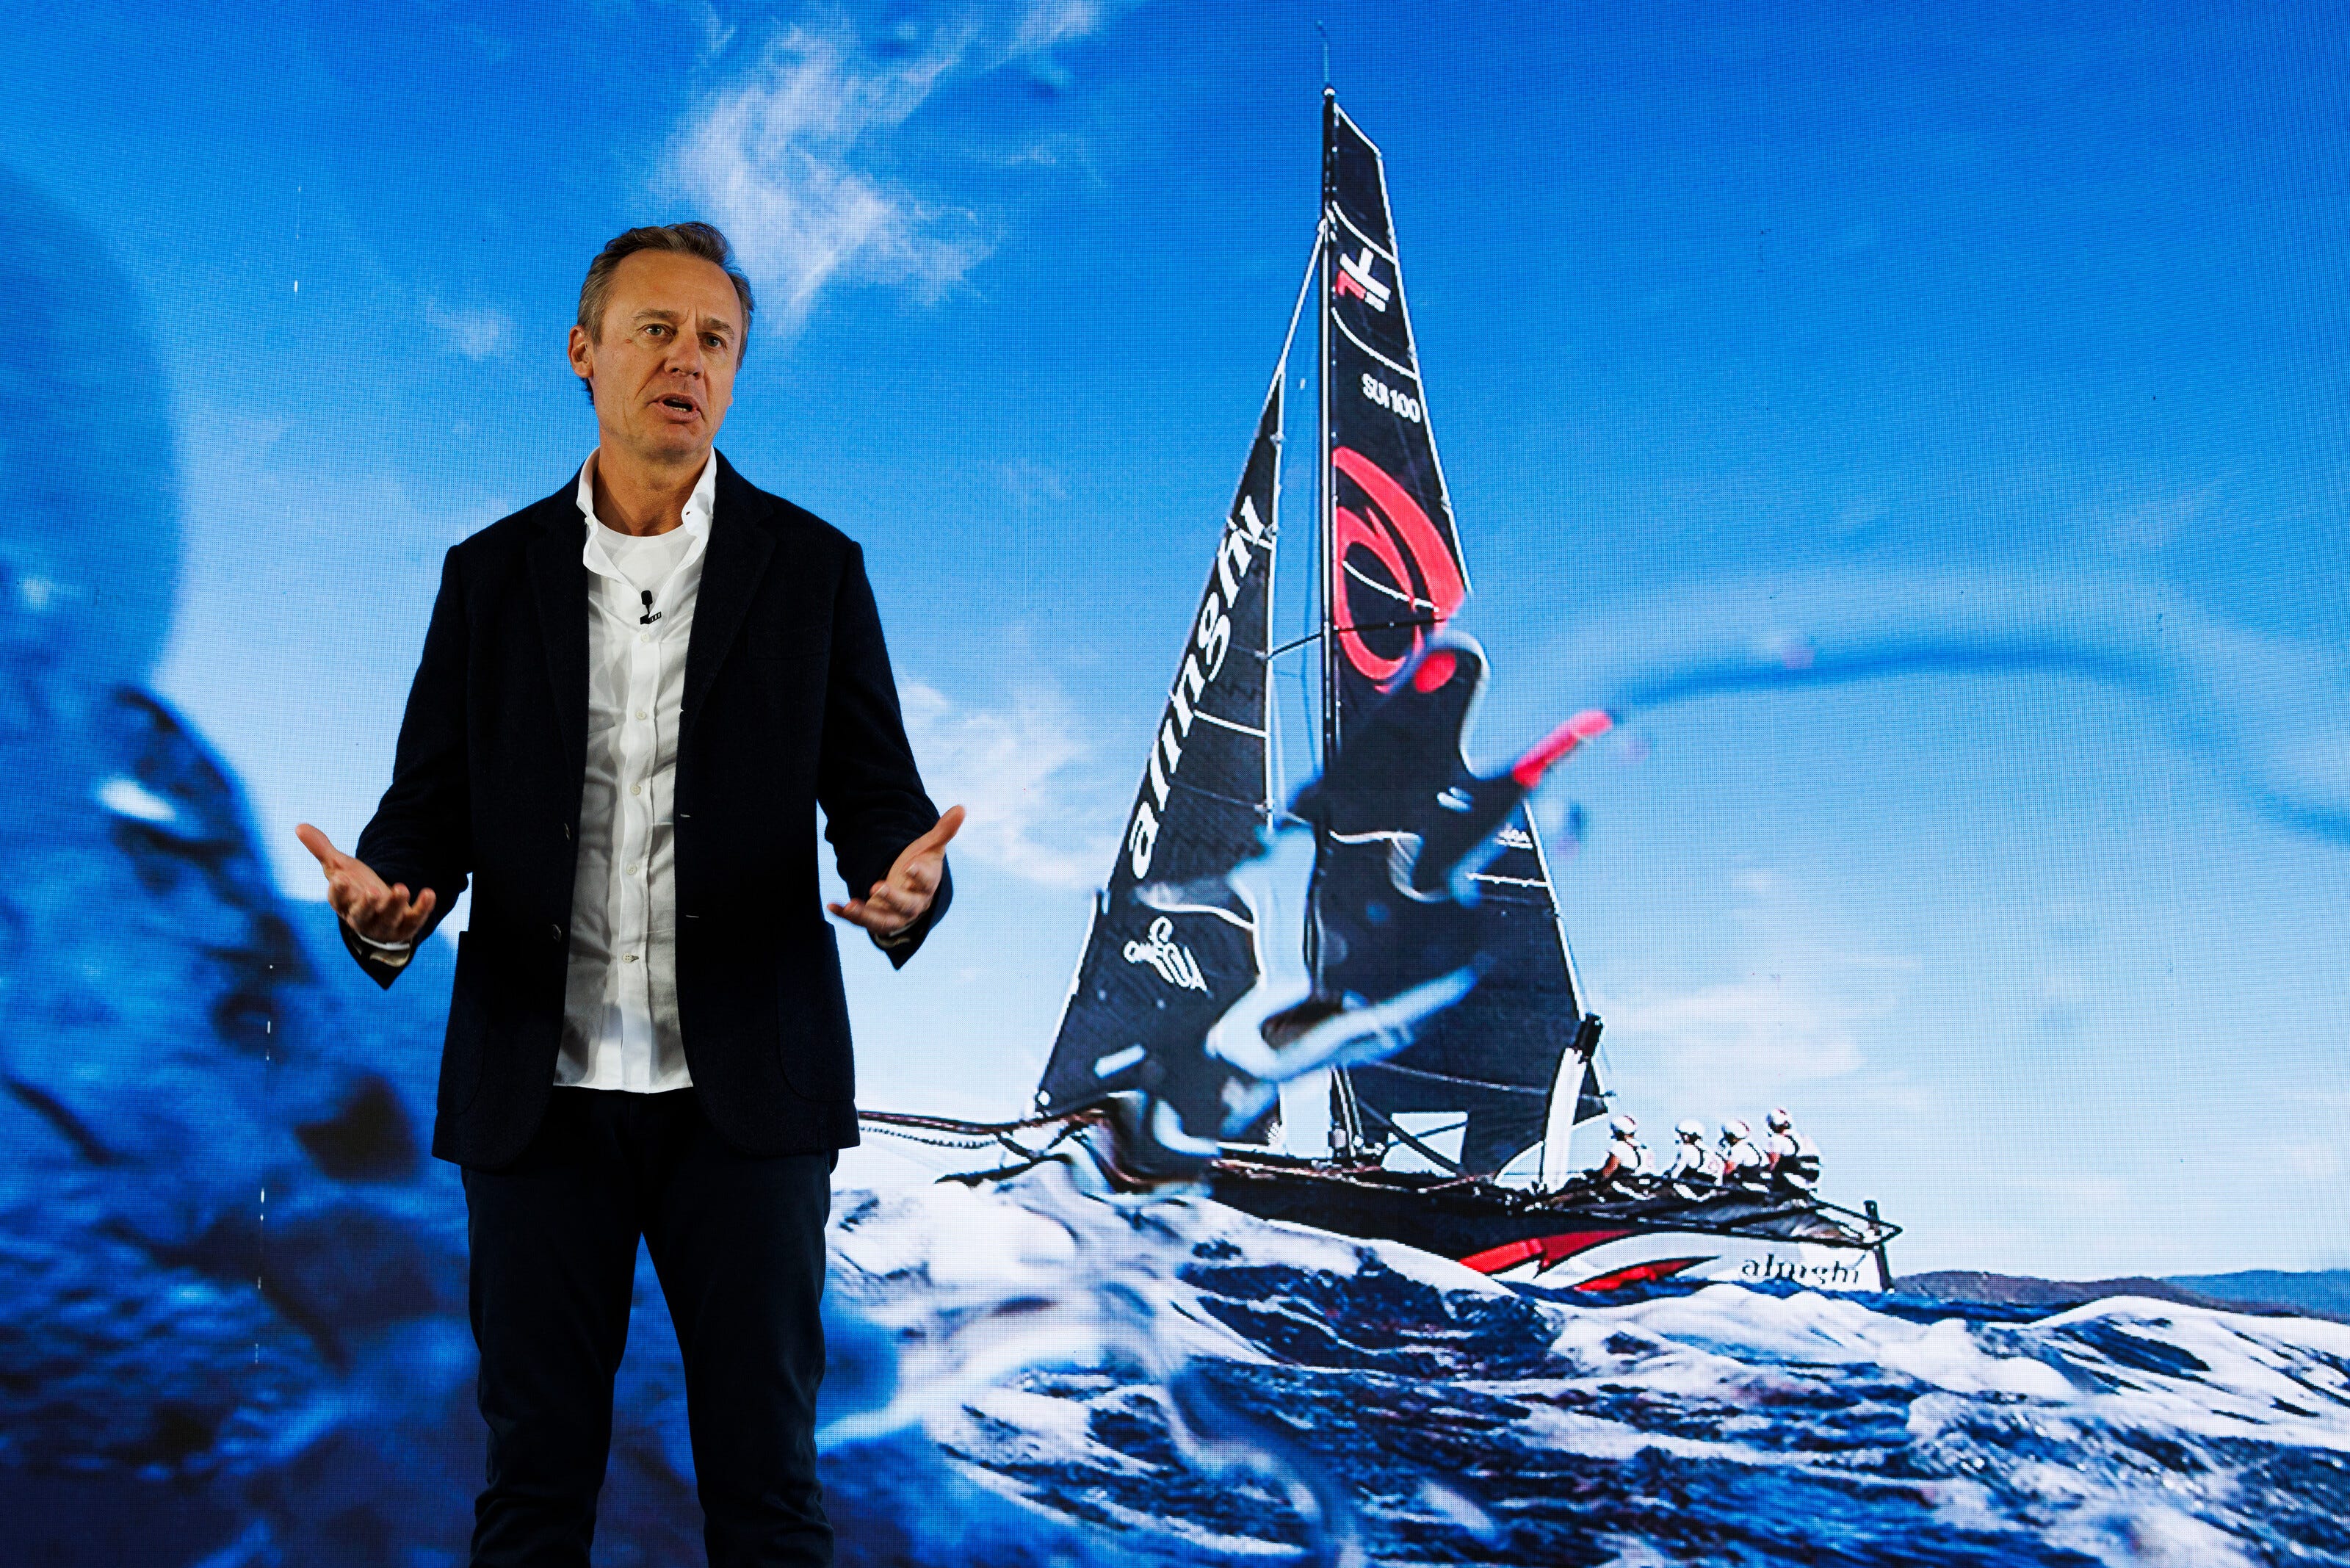 America's Cup: Alinghi Red Bull Racing launch their AC75 - Yachting World